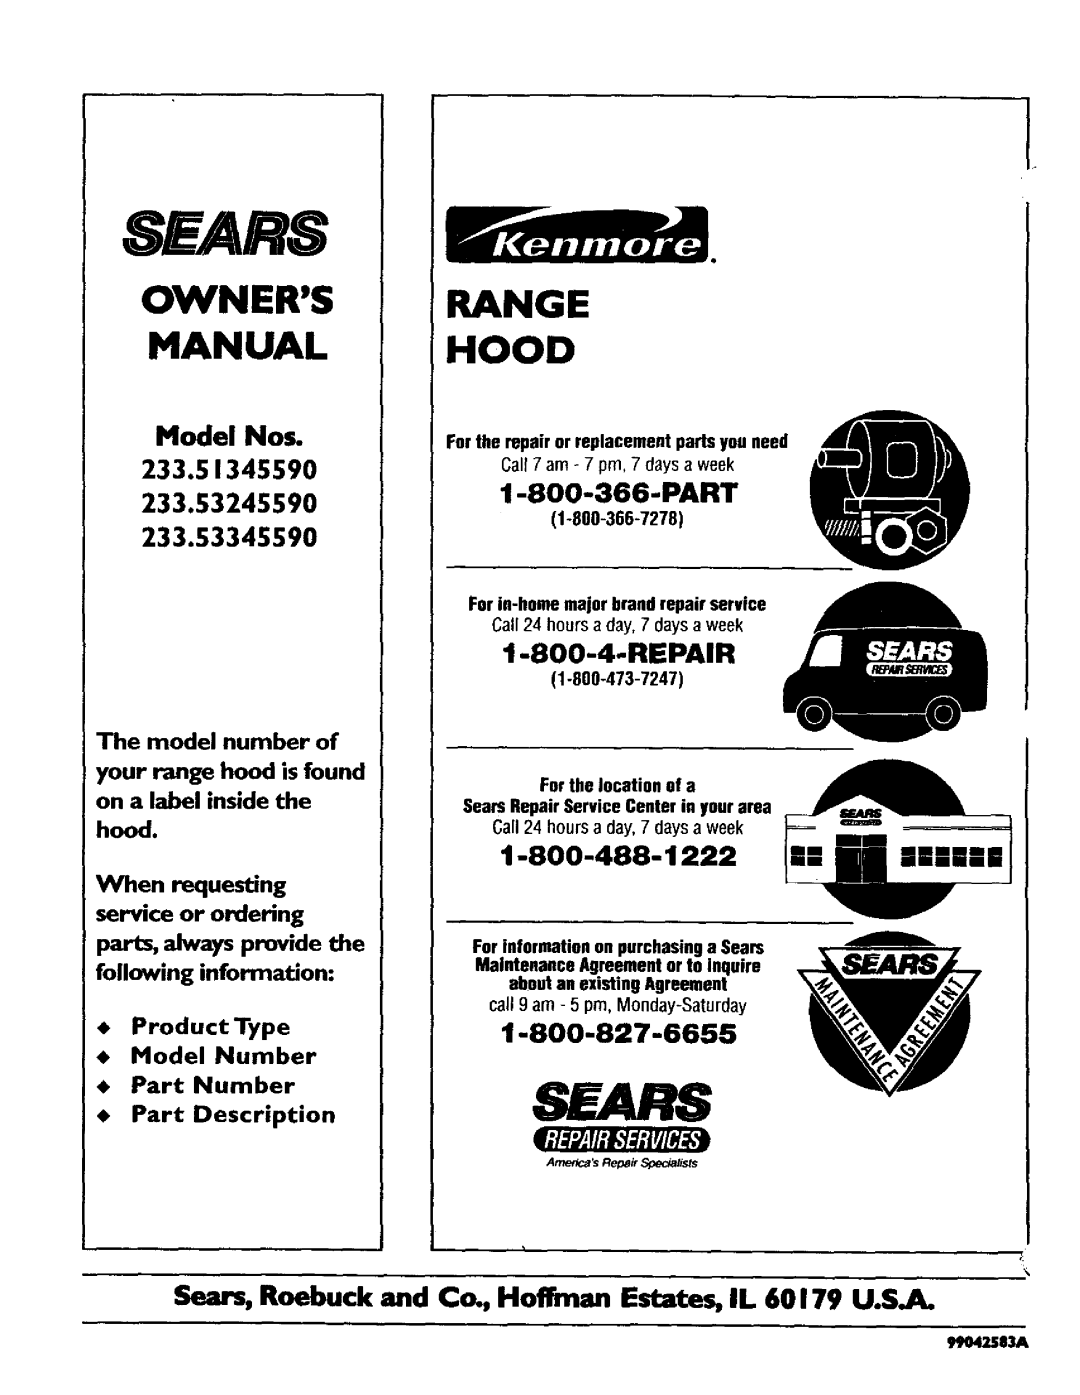 Sears 233.5134559 The model number of, Product Type Model Number Part Number, Part Description, Sears, Range Hood 